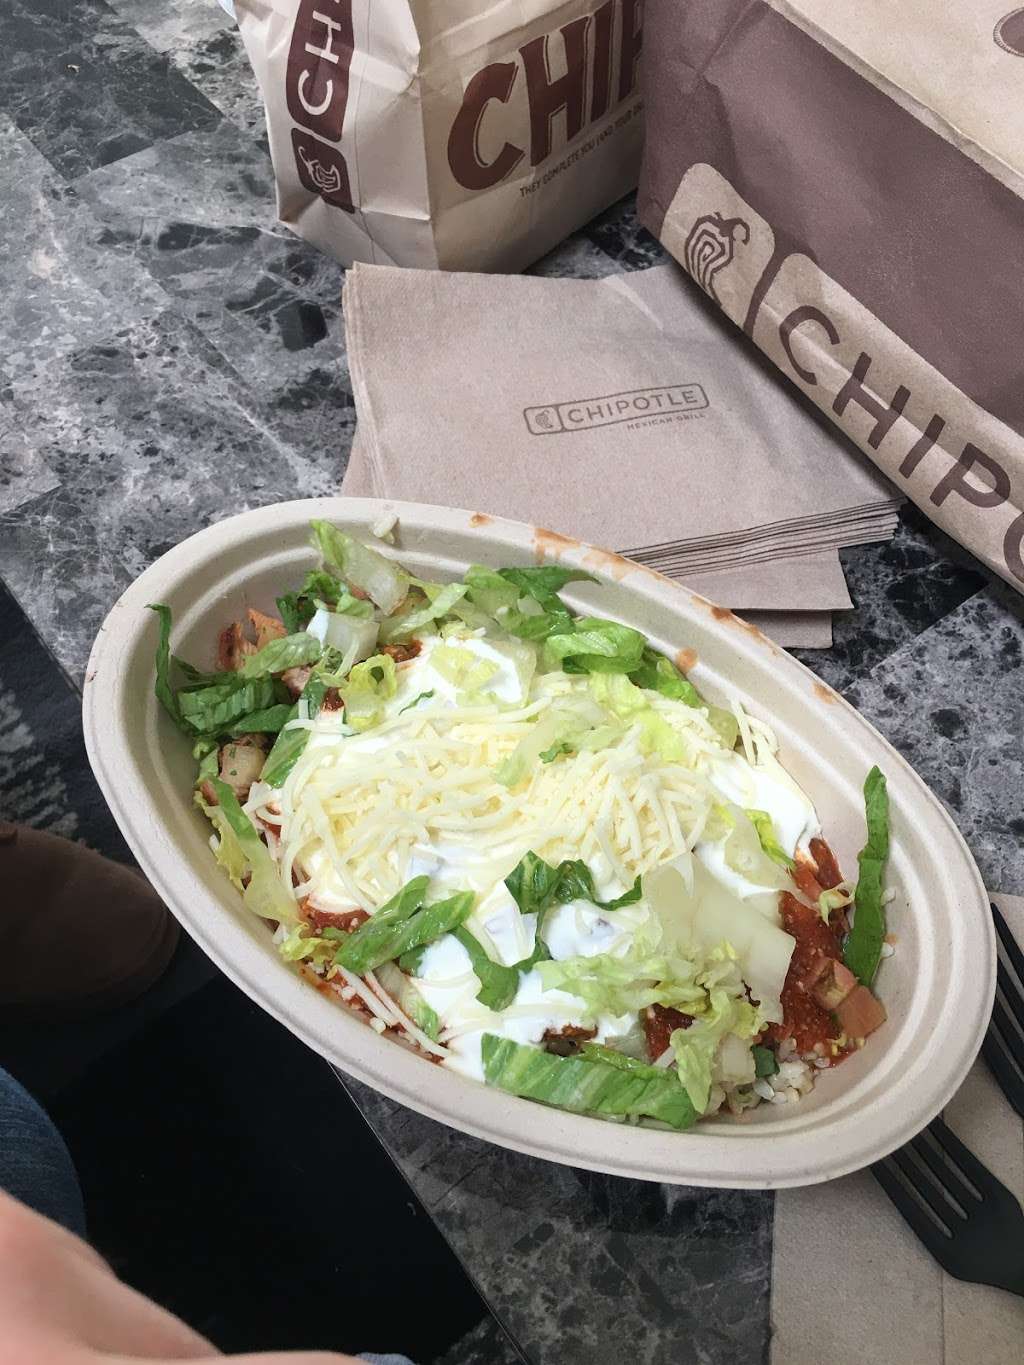 Chipotle Mexican Grill | 750 N Krocks Rd, Allentown, PA 18106, USA | Phone: (610) 336-8484